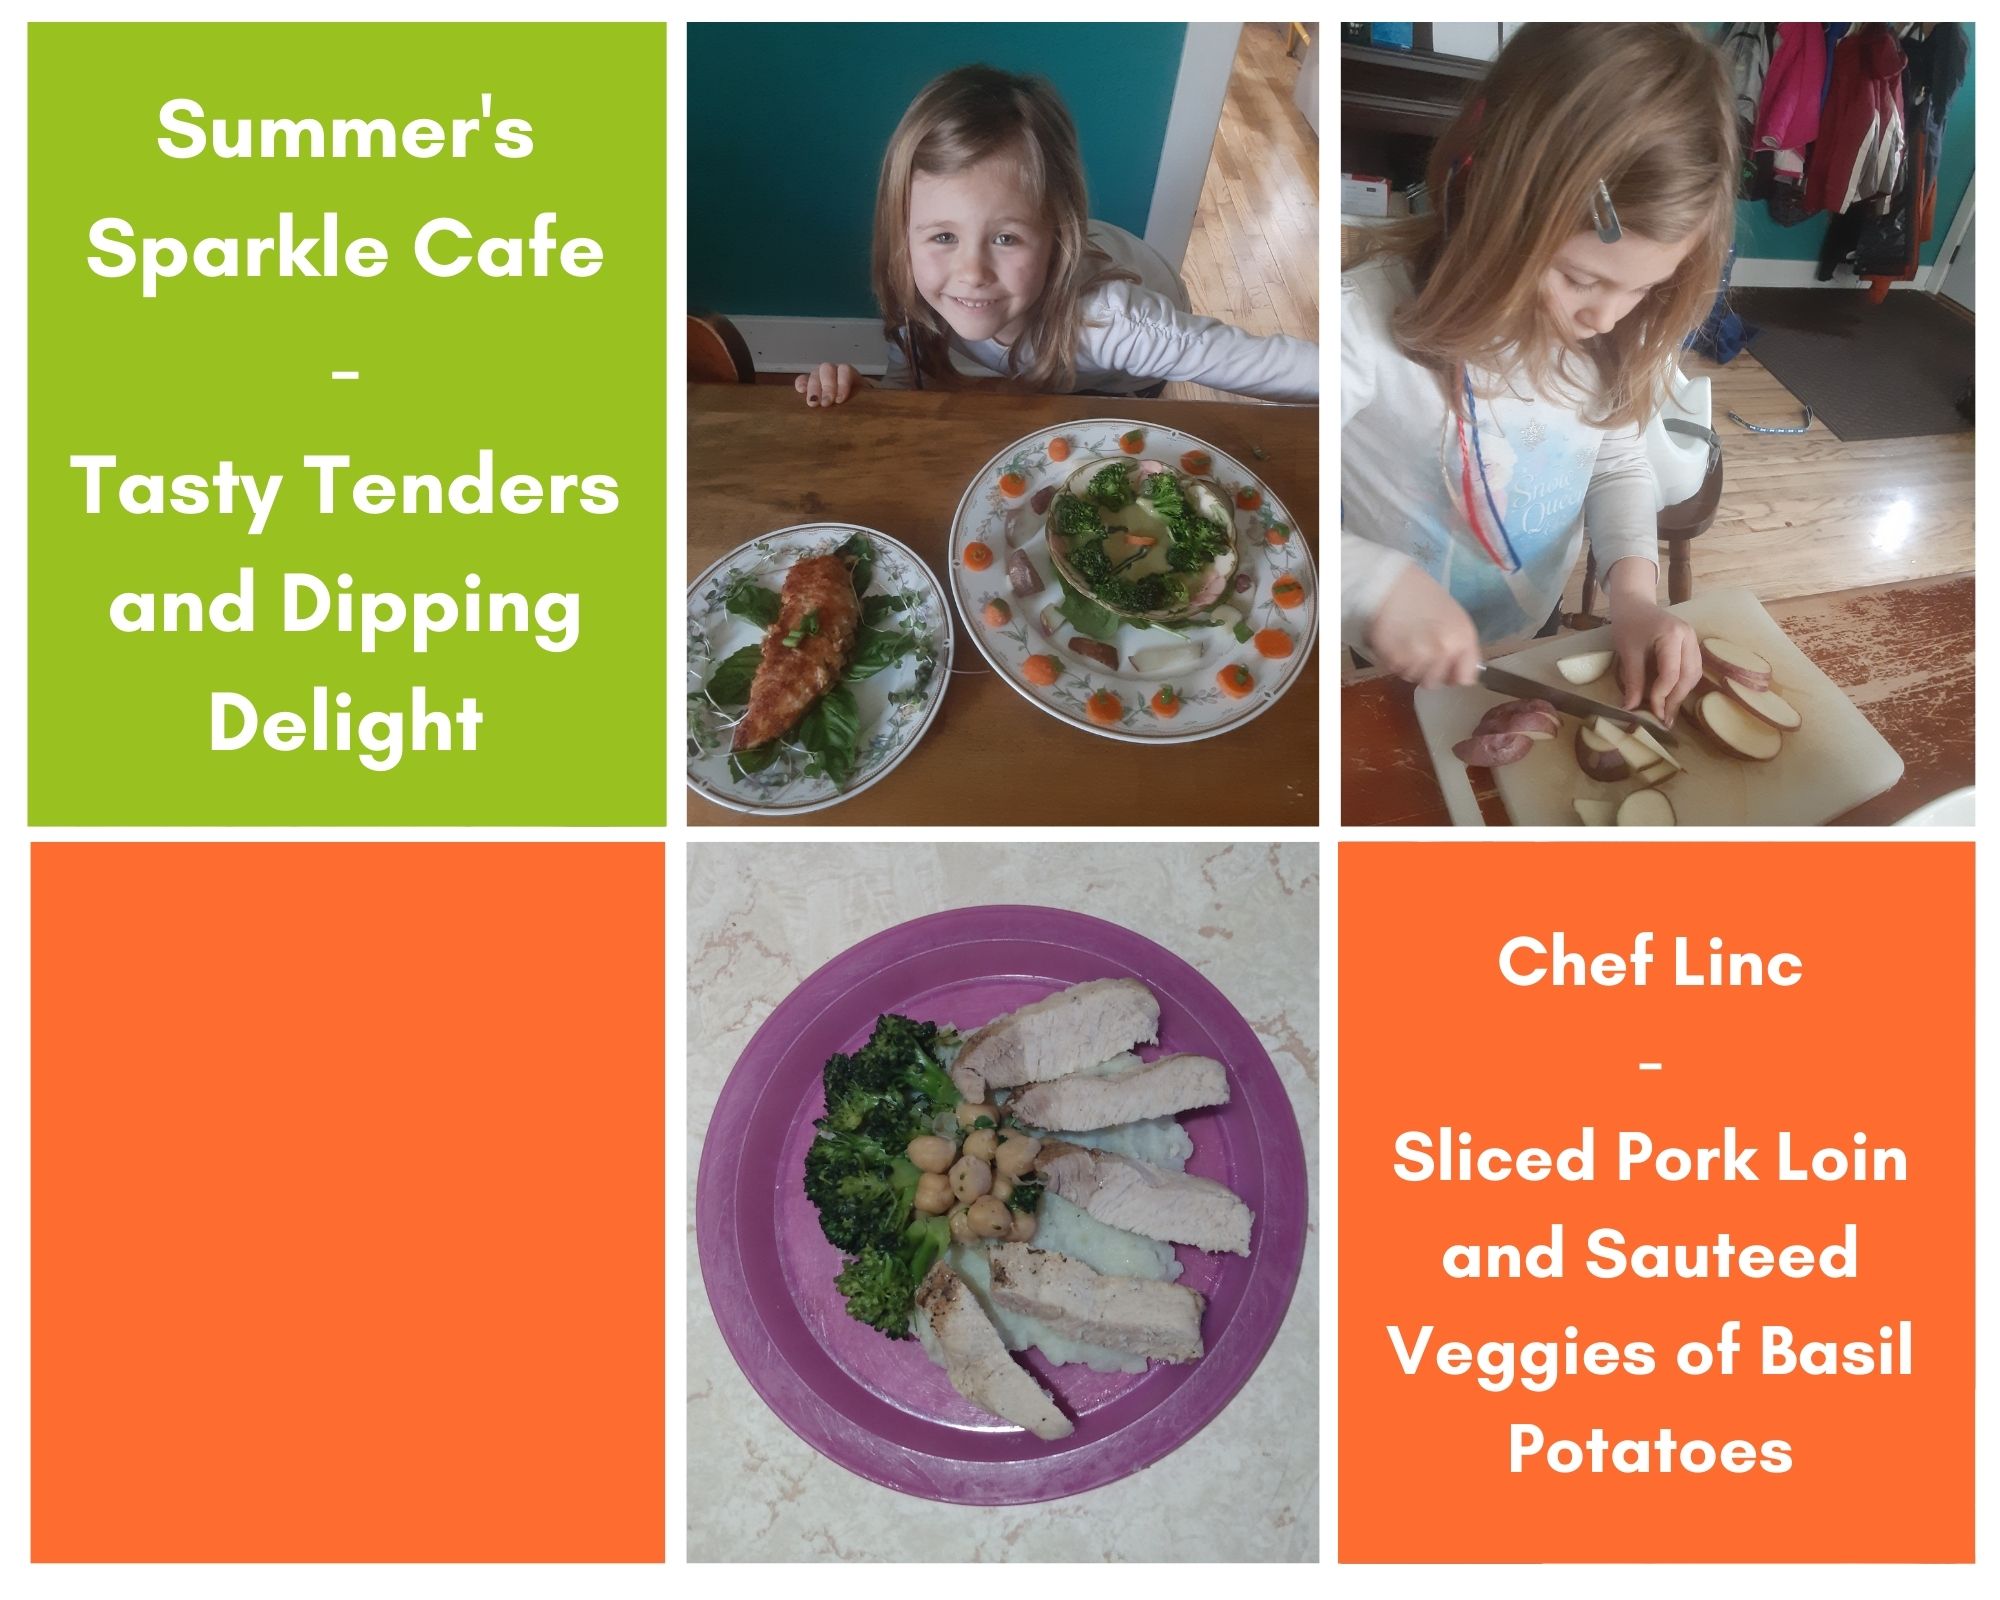 Summer's Sparkle Cafe and Chef Link